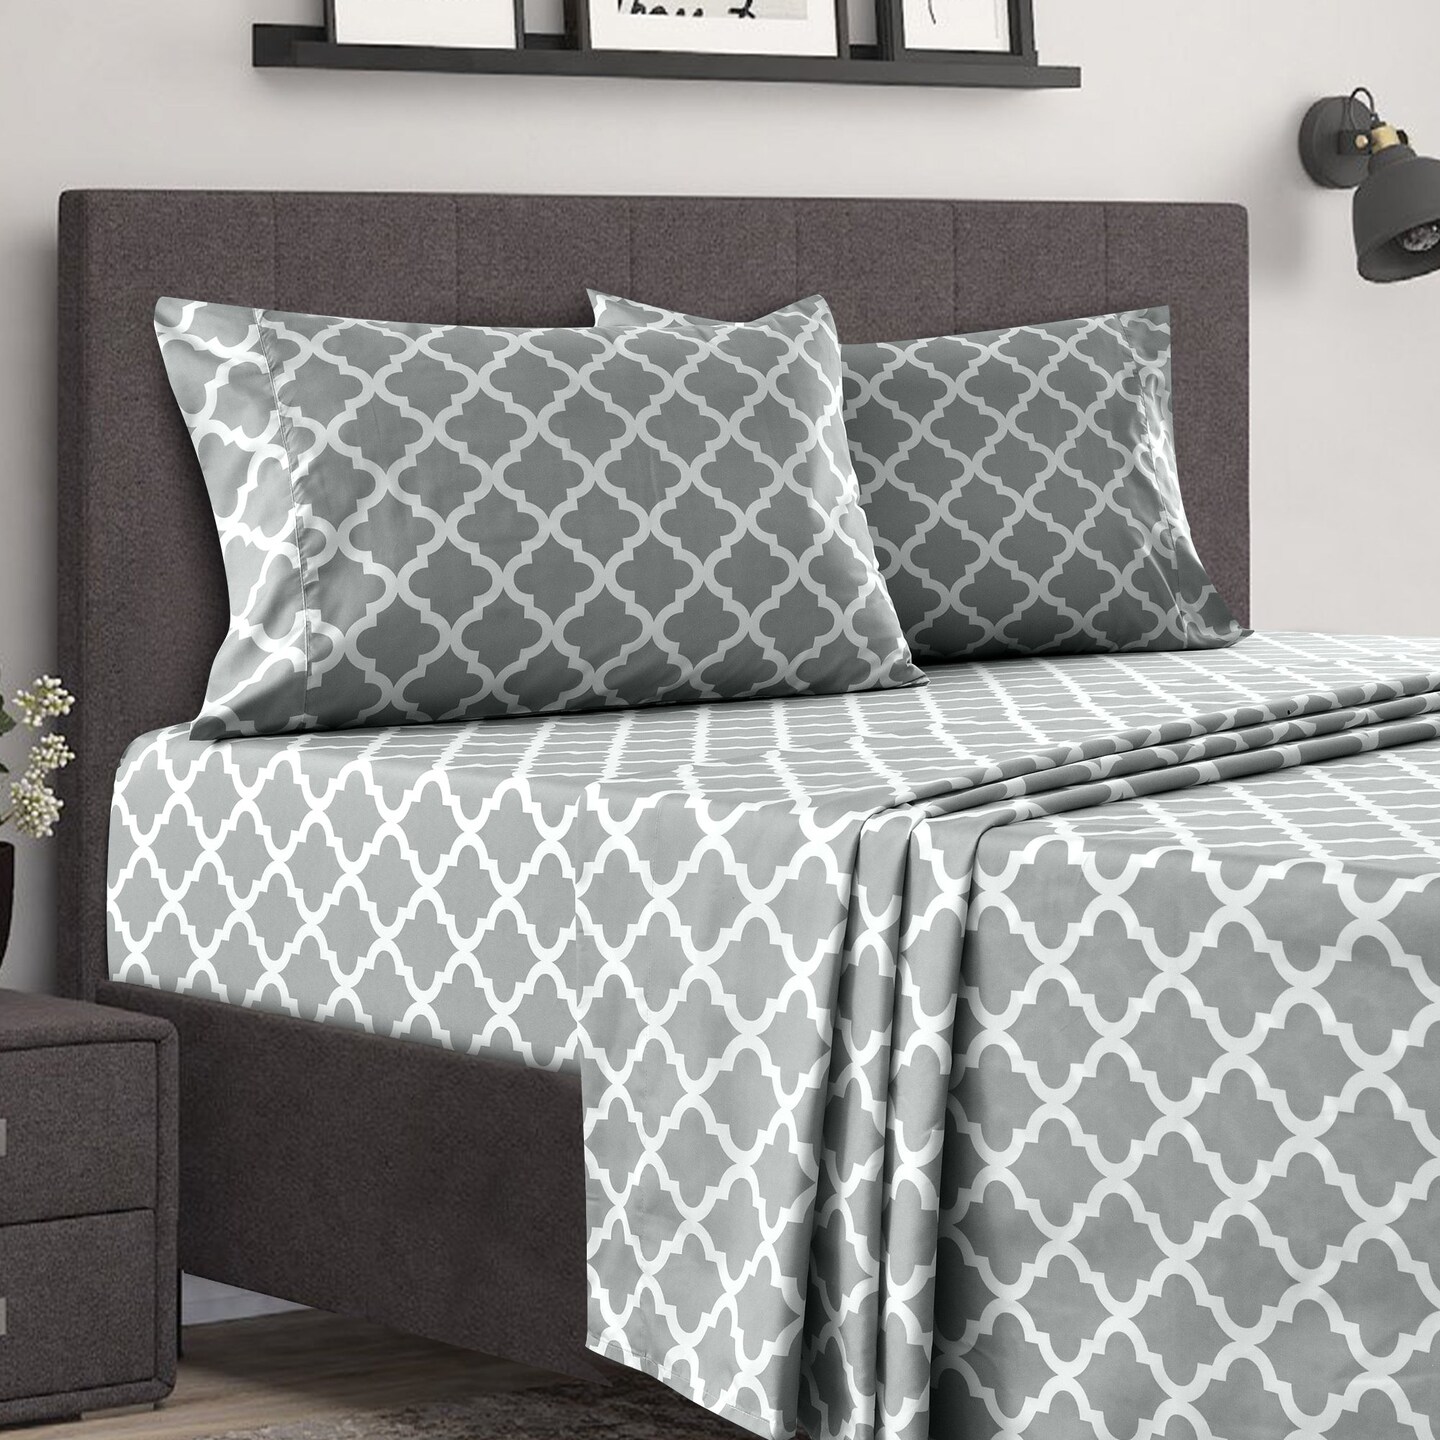 Lux Decor Collection 1800 Series Quatrefoil Pattern Bed Sheets Set - Wrinkle Fade Stain Resistant - Hypoallergenic